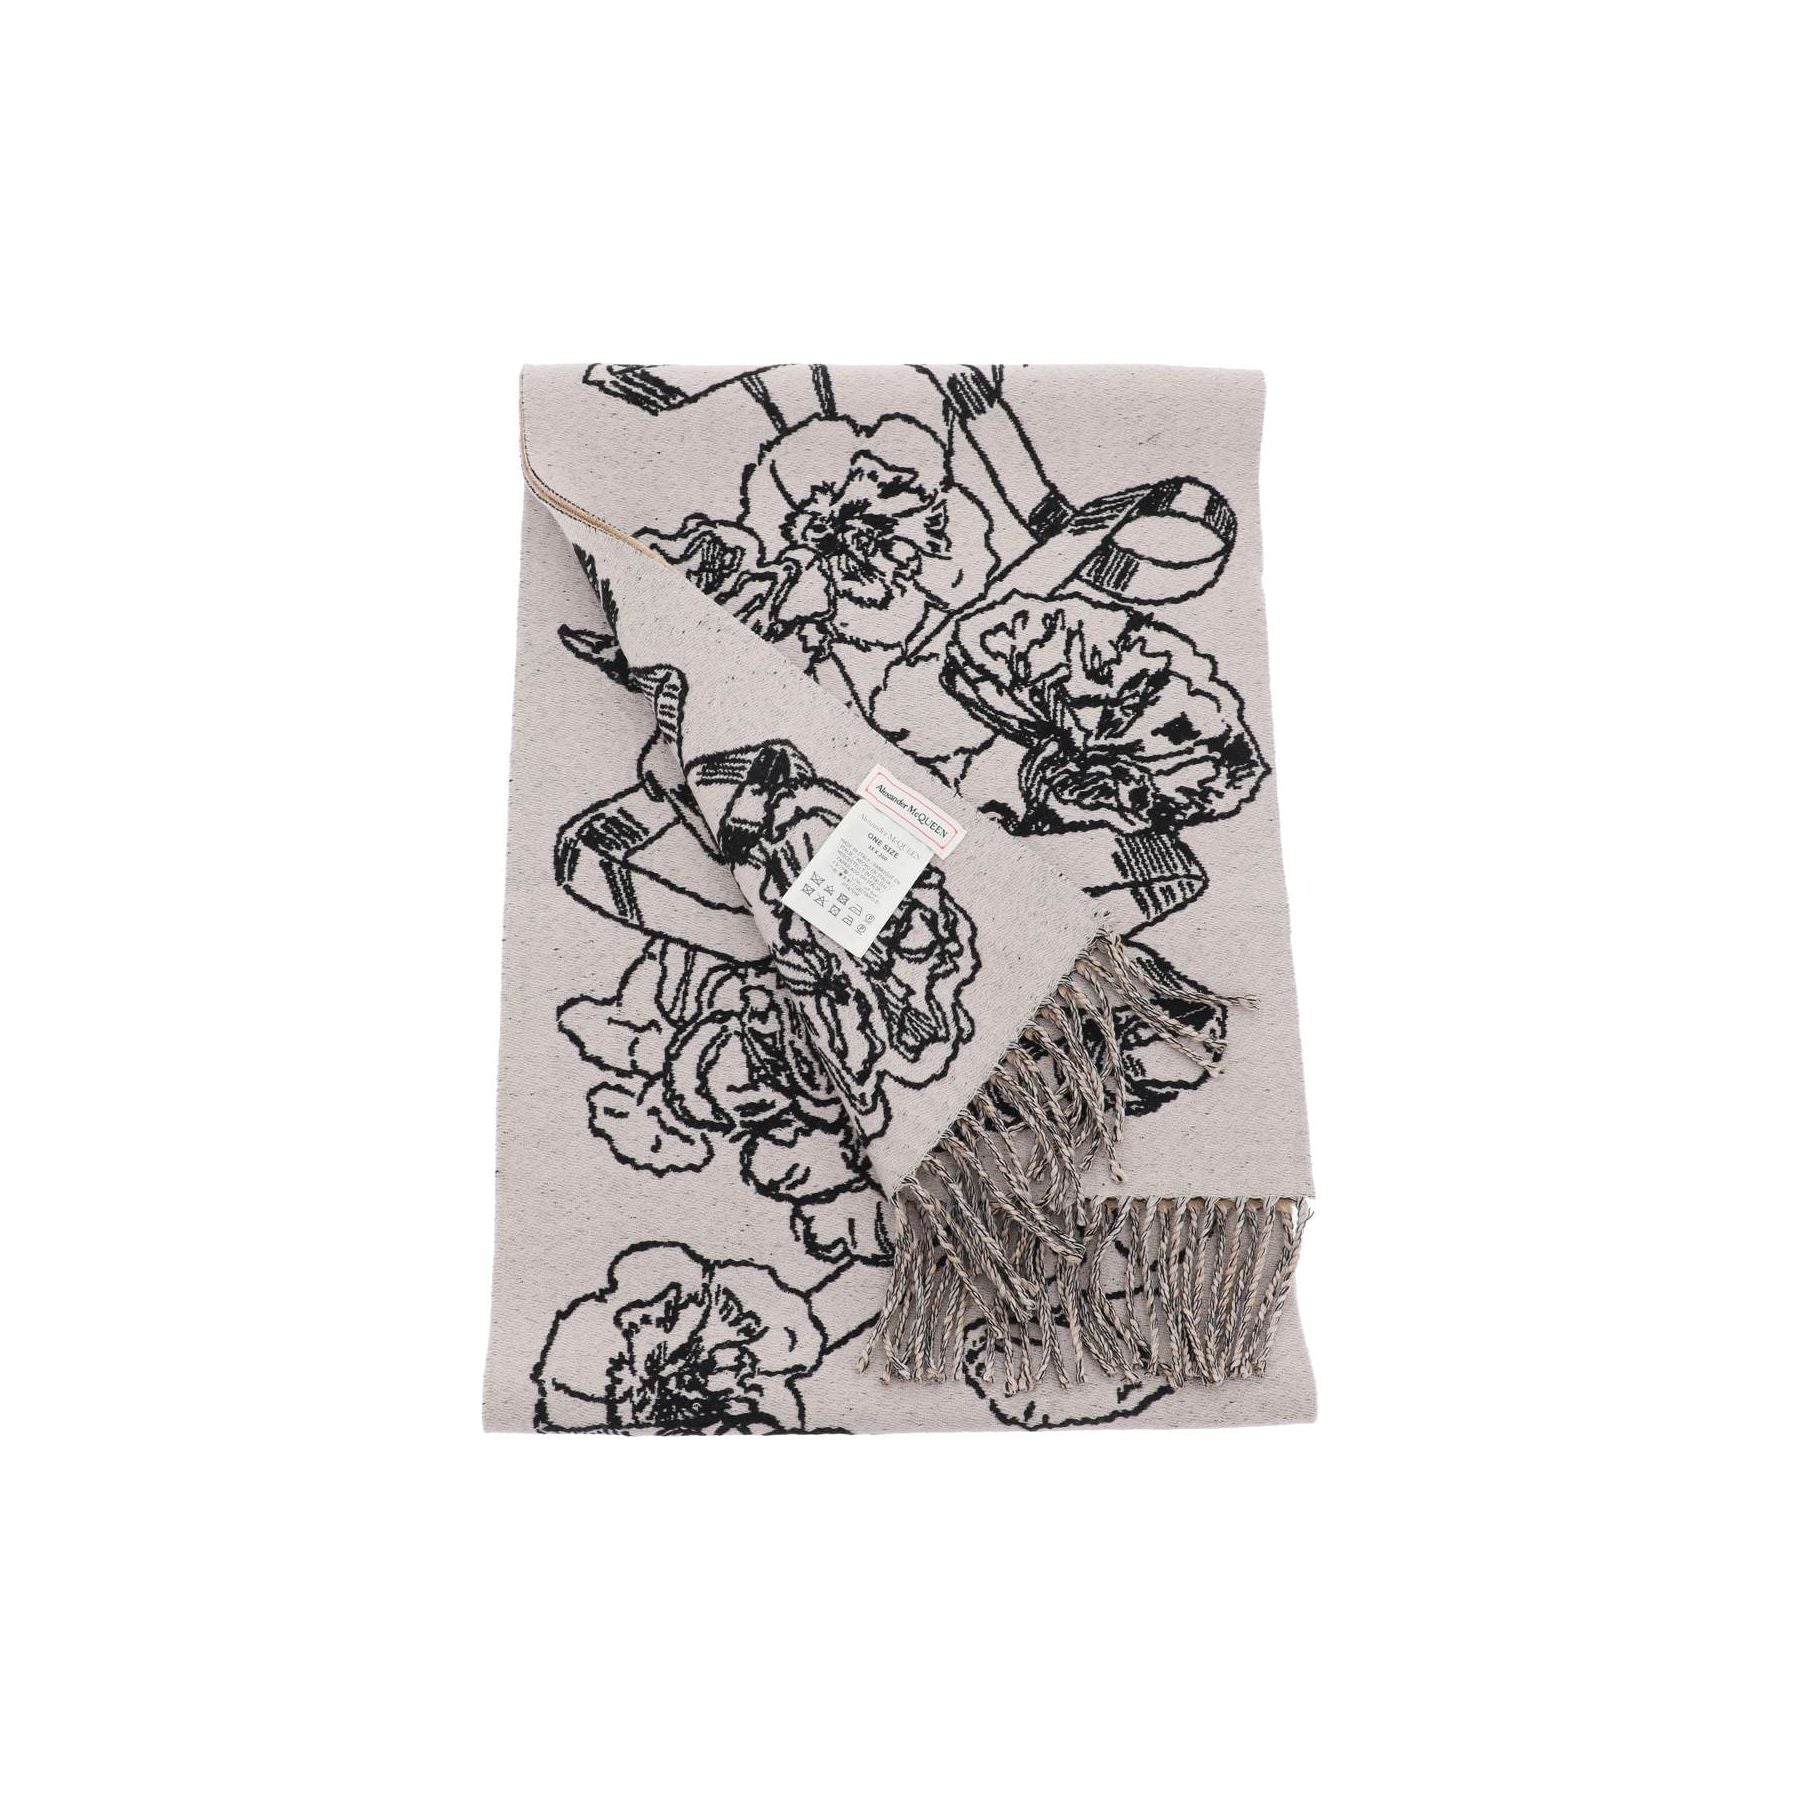 Reversible Wool Scarf with Skull and Floral Motif